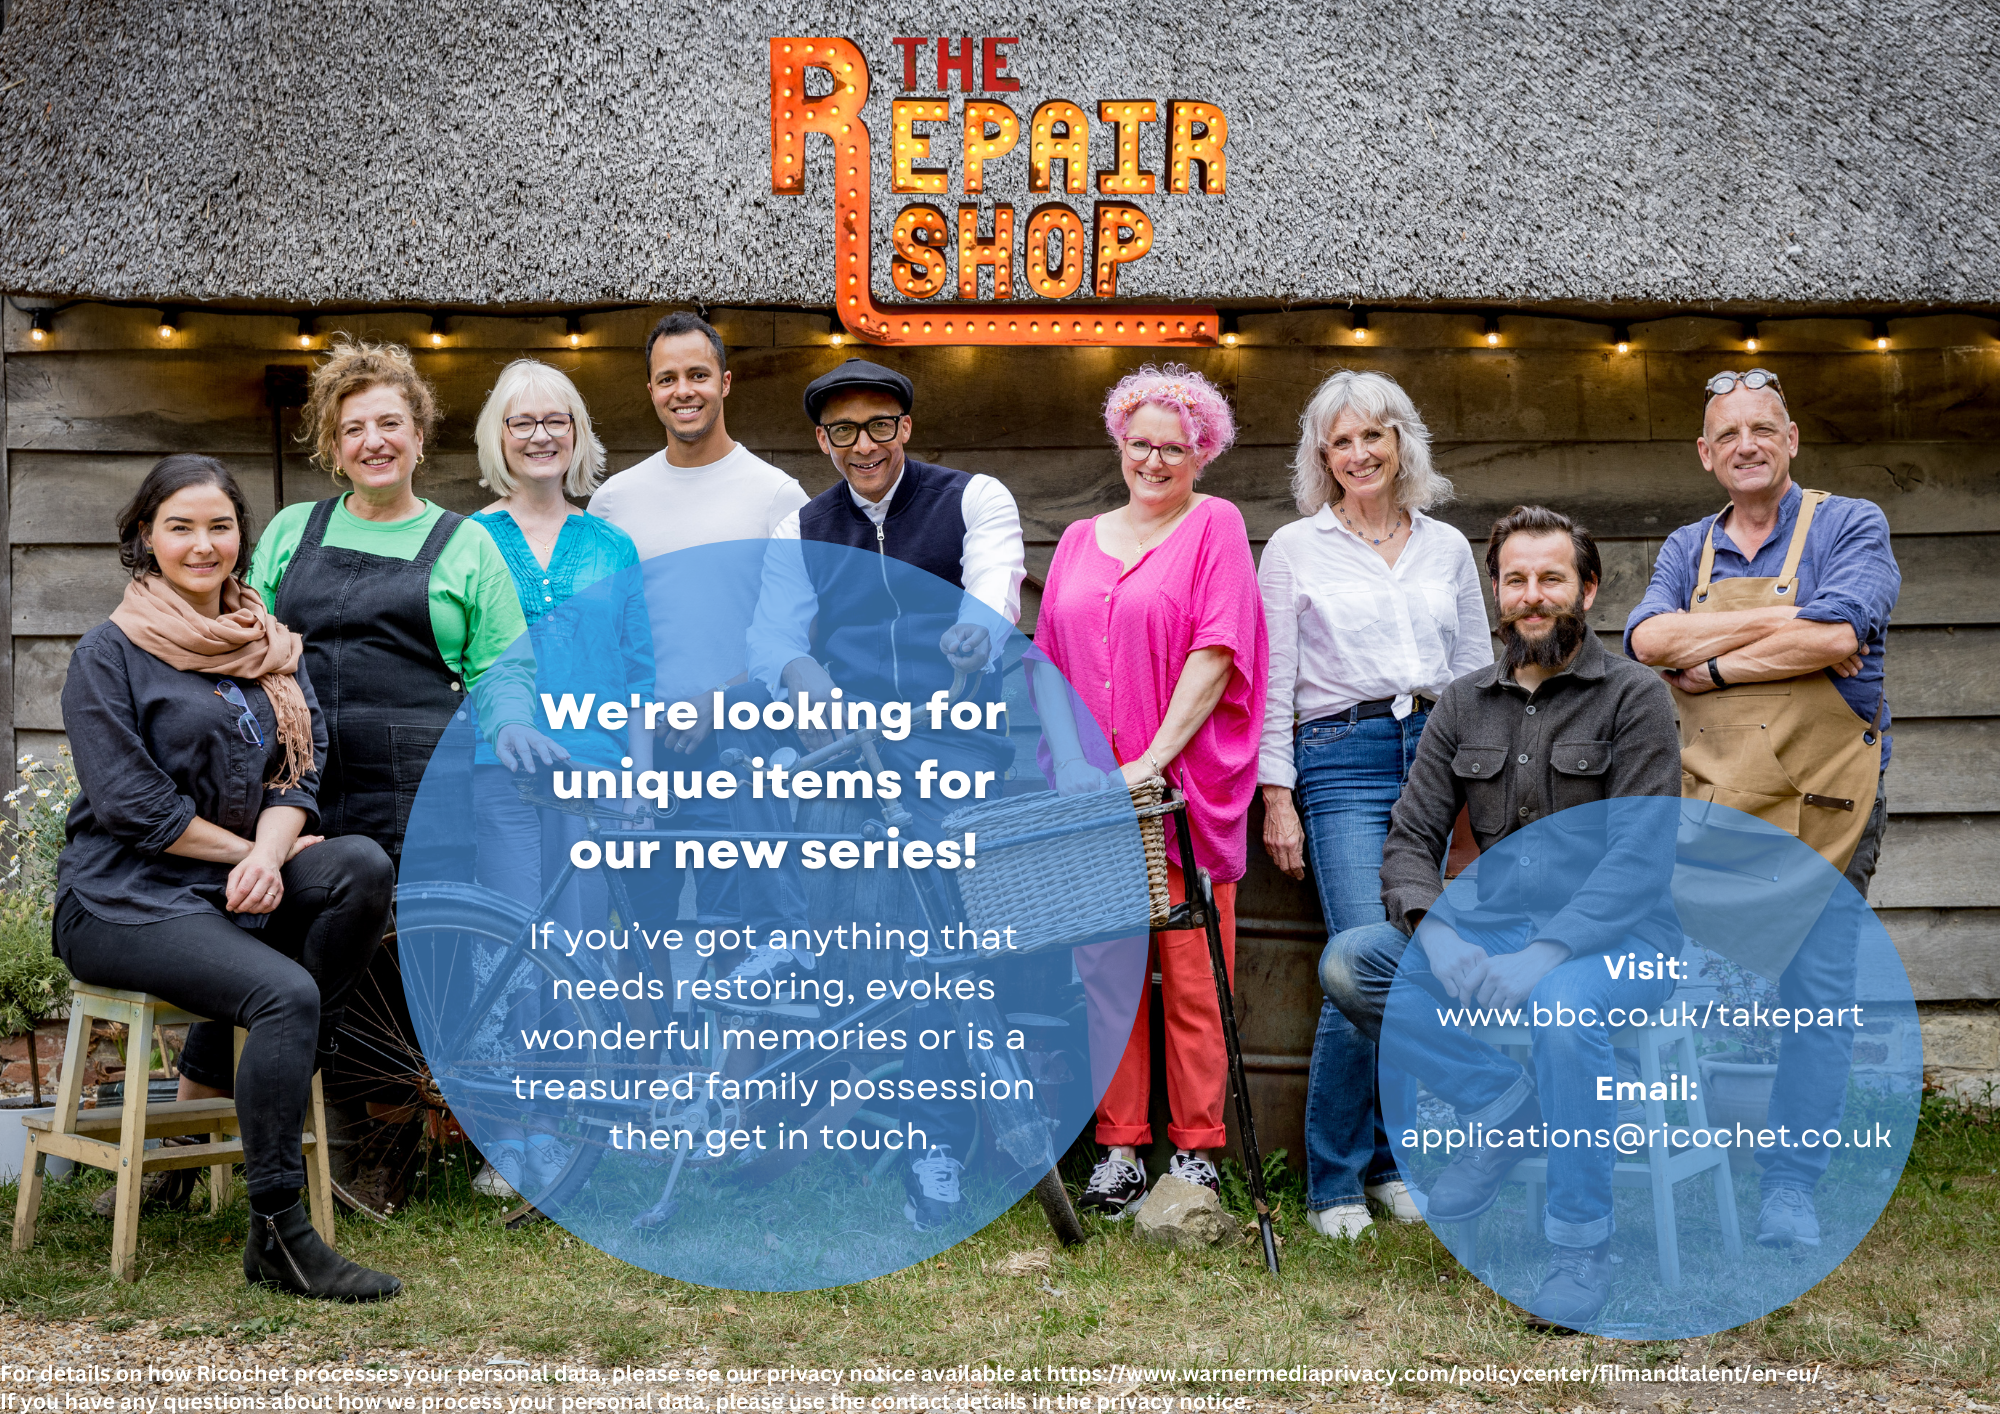 BBC Show the repair shop are looking for participants